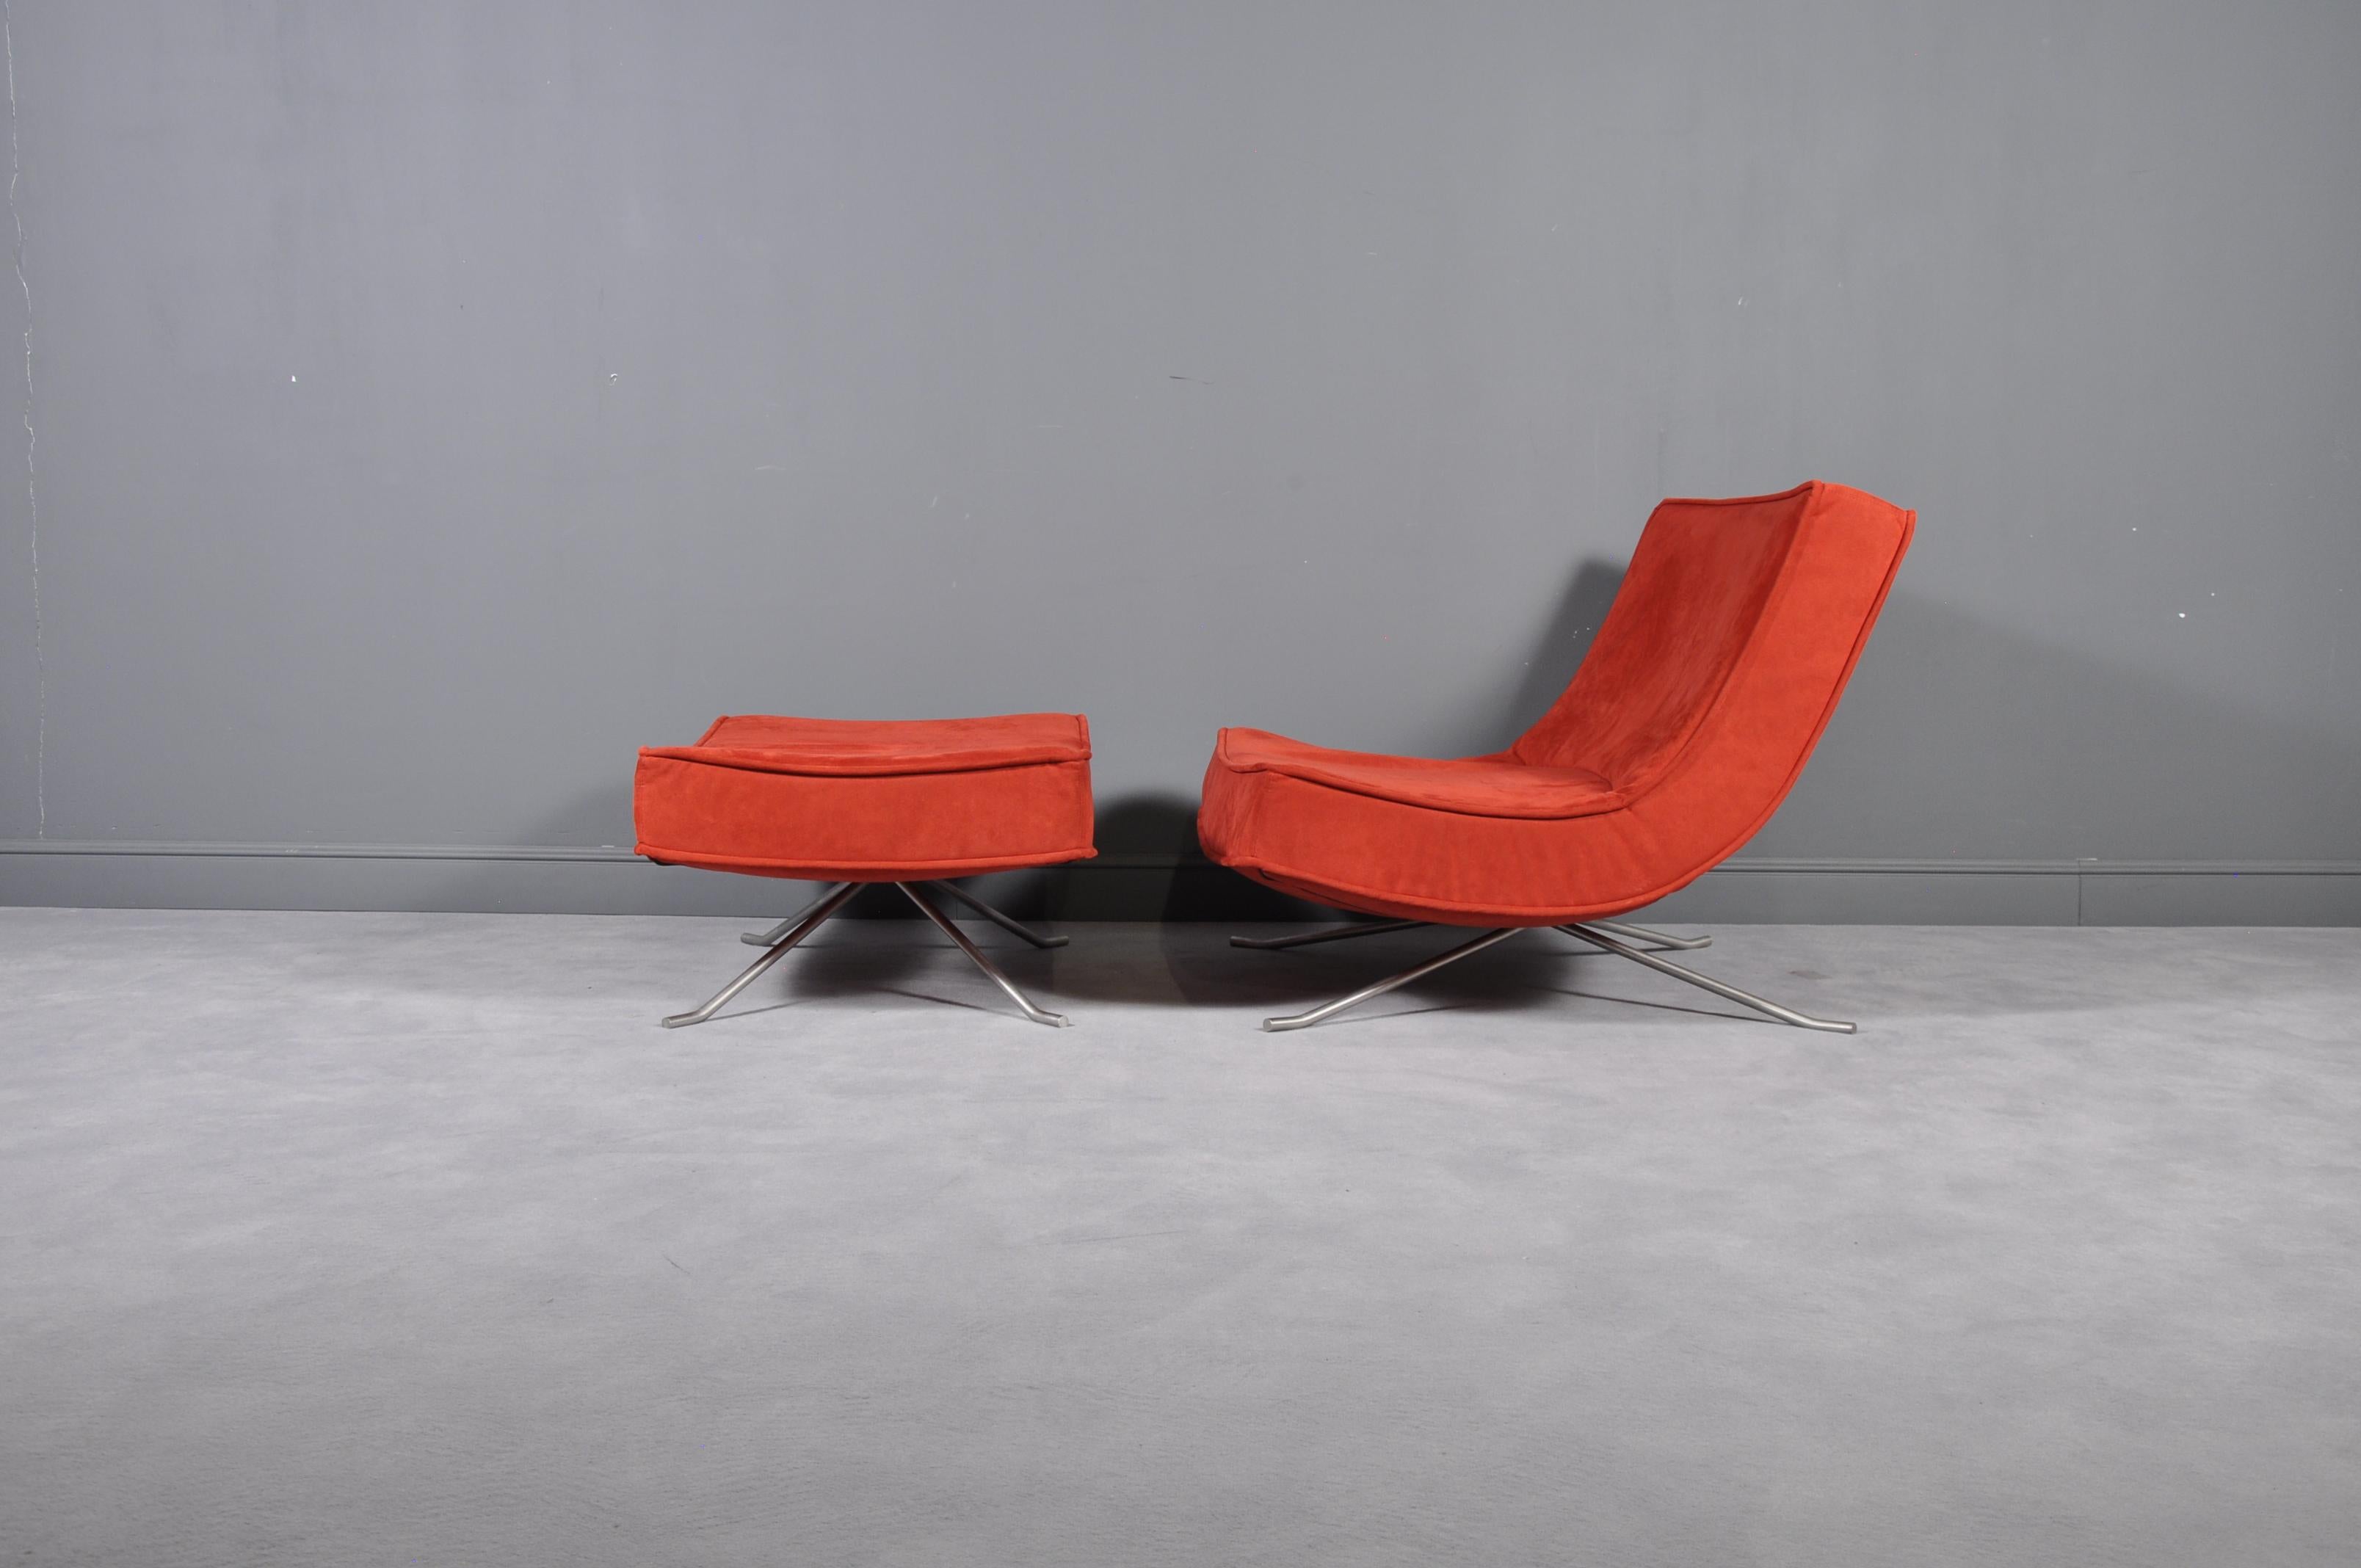 Measures: Chair W 90 / D 80 / H 71 cm seat H 35 cm

Ottoman W 90 / D 60 / H 35 cm

Lounge chair and ottoman by Christian Werner for Ligne Roset, France, 1990s.Originally designed by Christian Werner in 1990s, the Pop chair combines soft curves